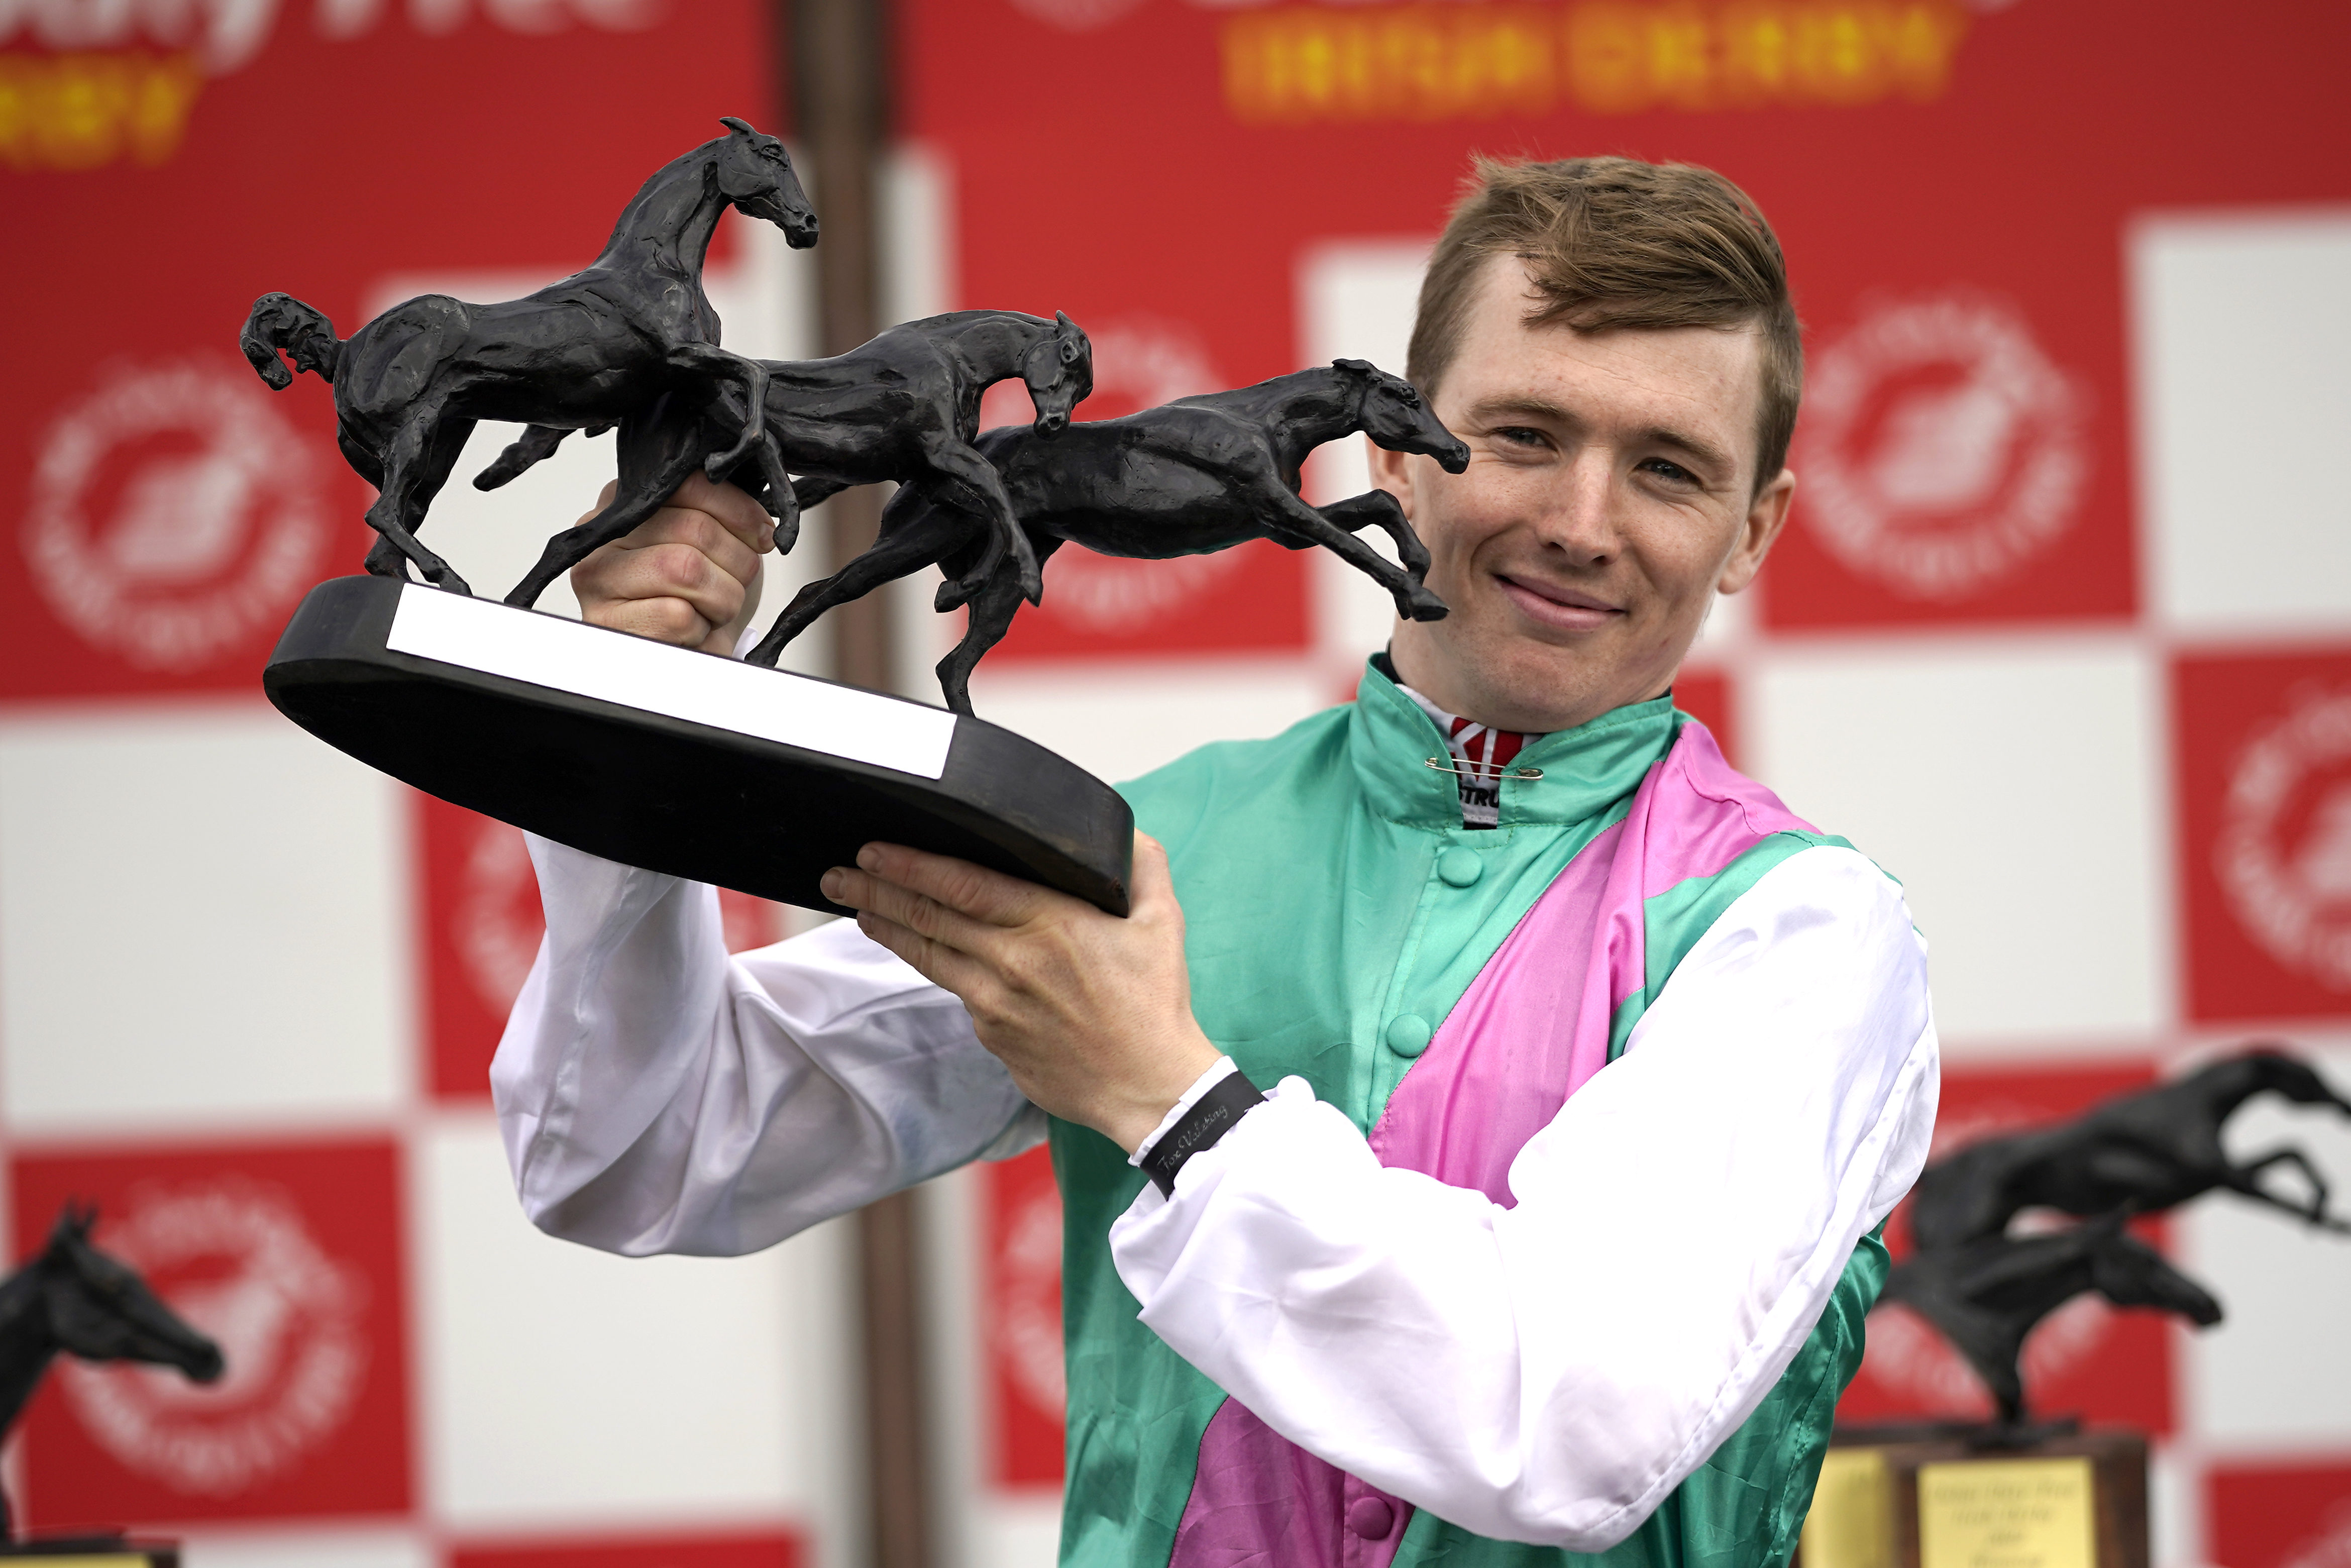 Jockey Colin Keane celebrates with the trophy after winning the Dubai Duty Free Irish Derby with horse Westover during day two of the Dubai Duty Free Irish Derby Festival at Curragh Racecourse in County Kildare, Ireland (Niall Carson/PA Wire)